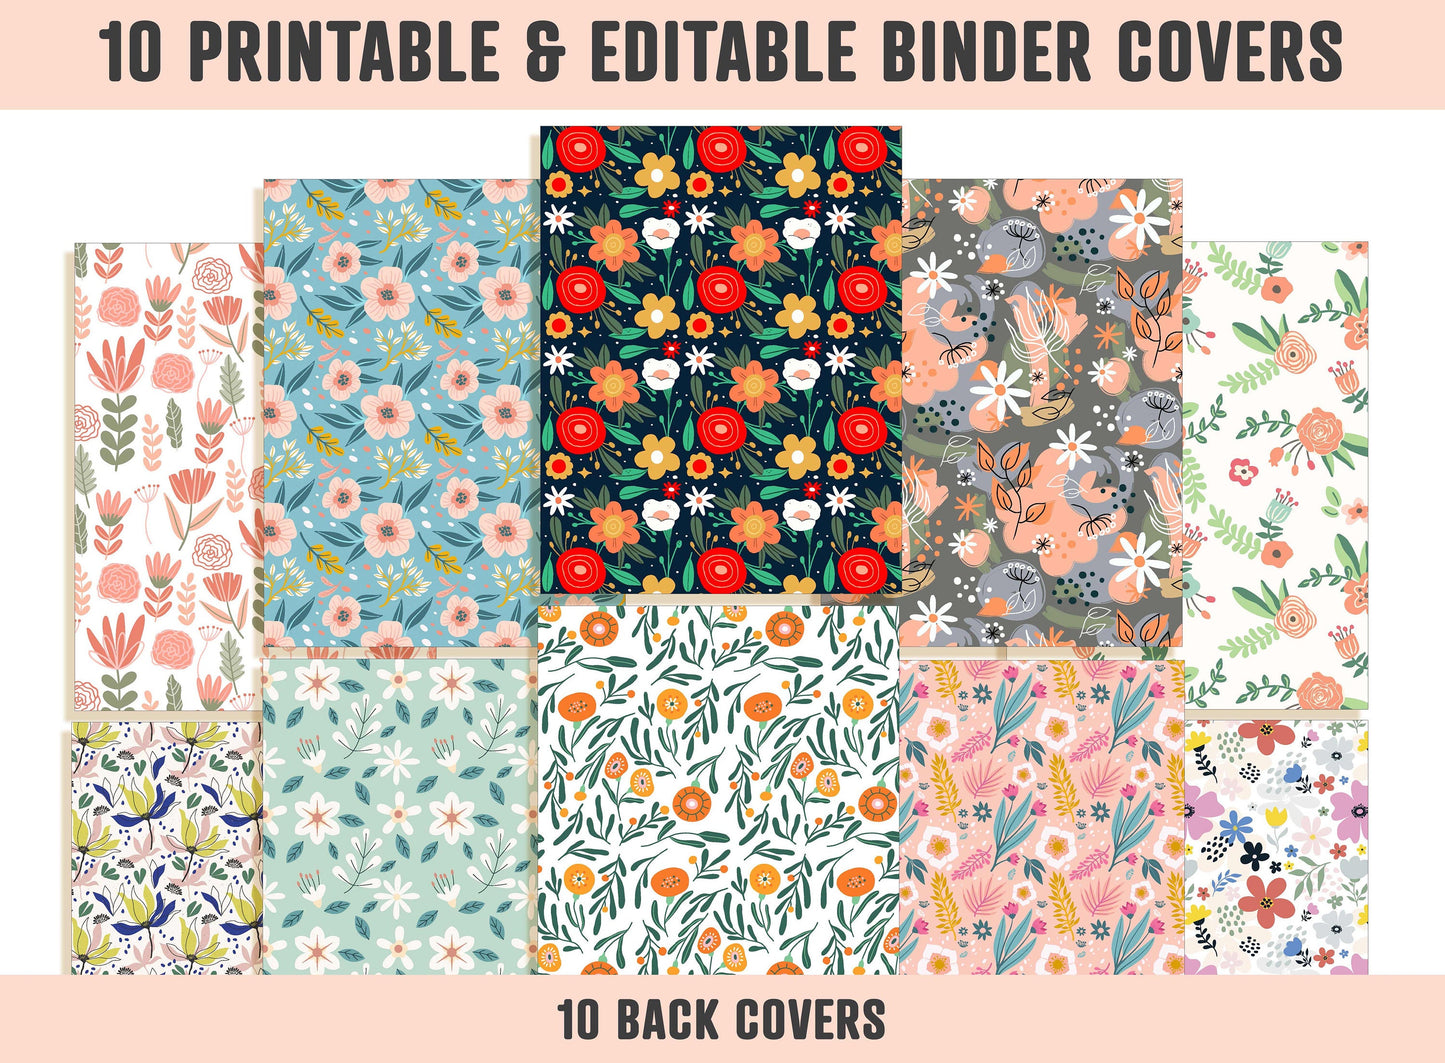 Floral Binder Cover Template, 10 Printable & Editable Binder Covers+Spines, Flower Binder Cover Binder Inserts Planner Cover Floral Folders